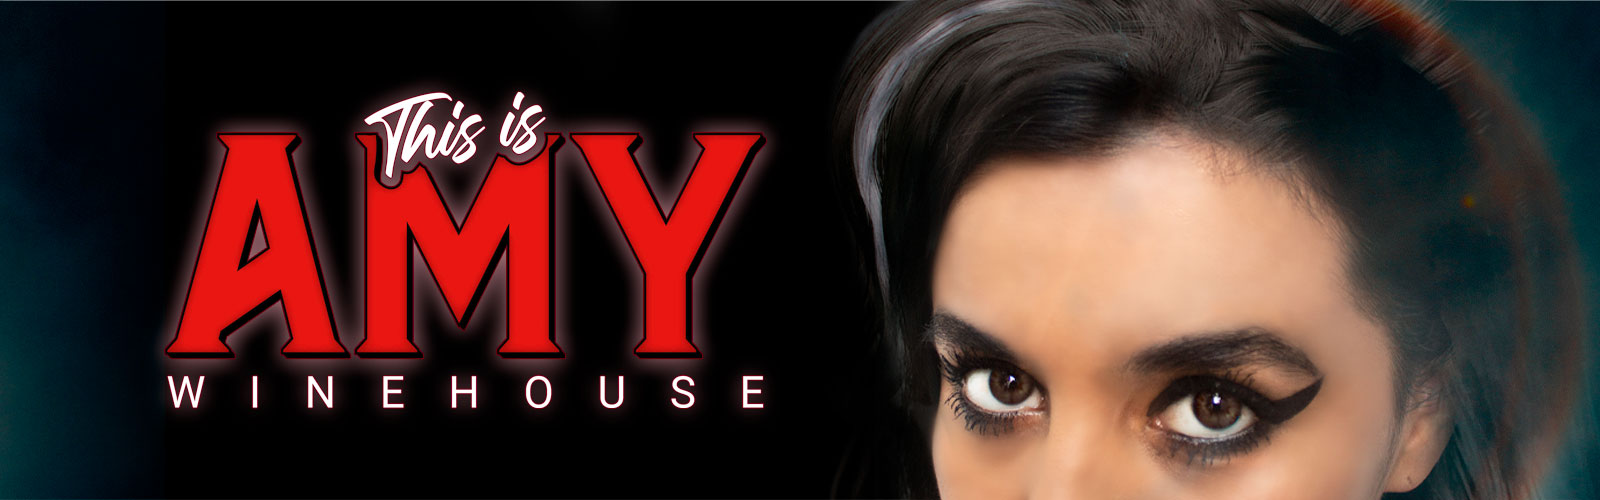 THIS IS AMY (WINEHOUSE)